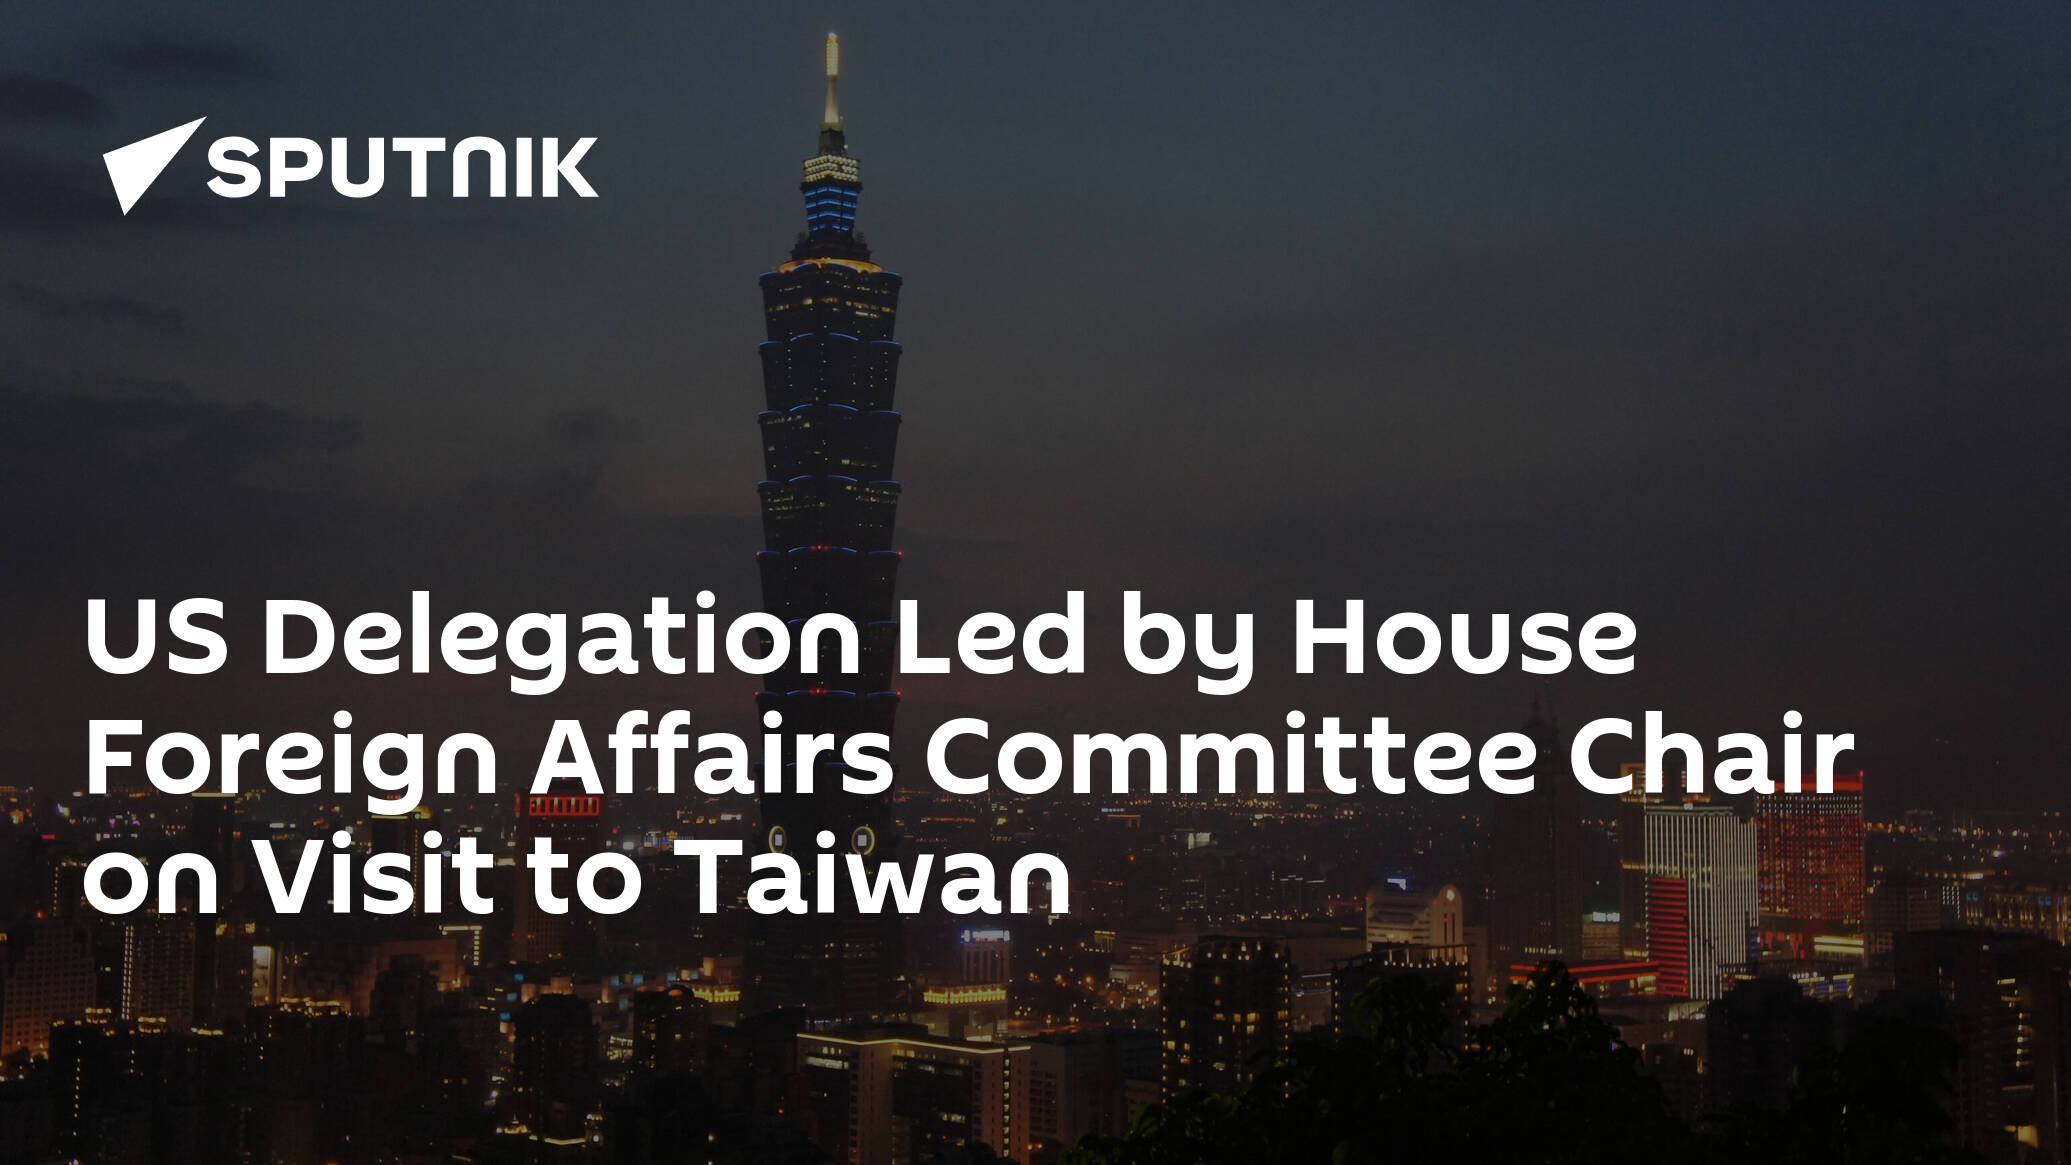 US Delegation Led by House Foreign Affairs Committee Chair on Visit to Taiwan